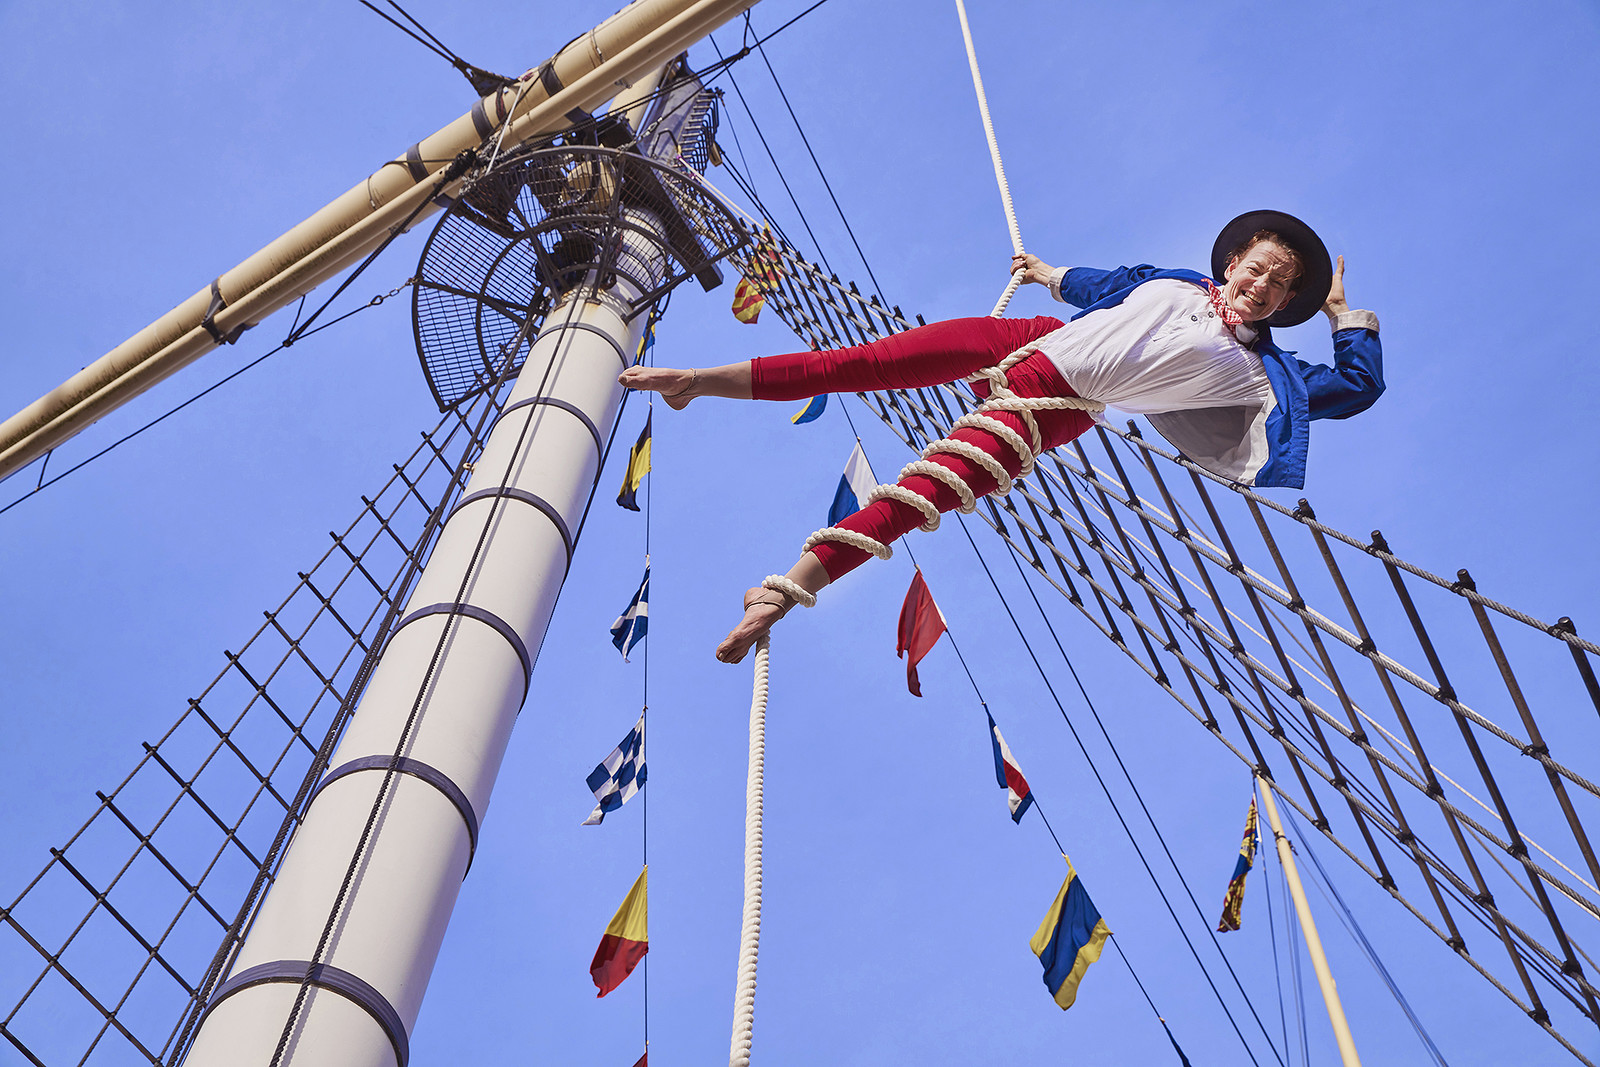 Summer Spectacular with The Invisible Circus at Brunel's SS Great Britain